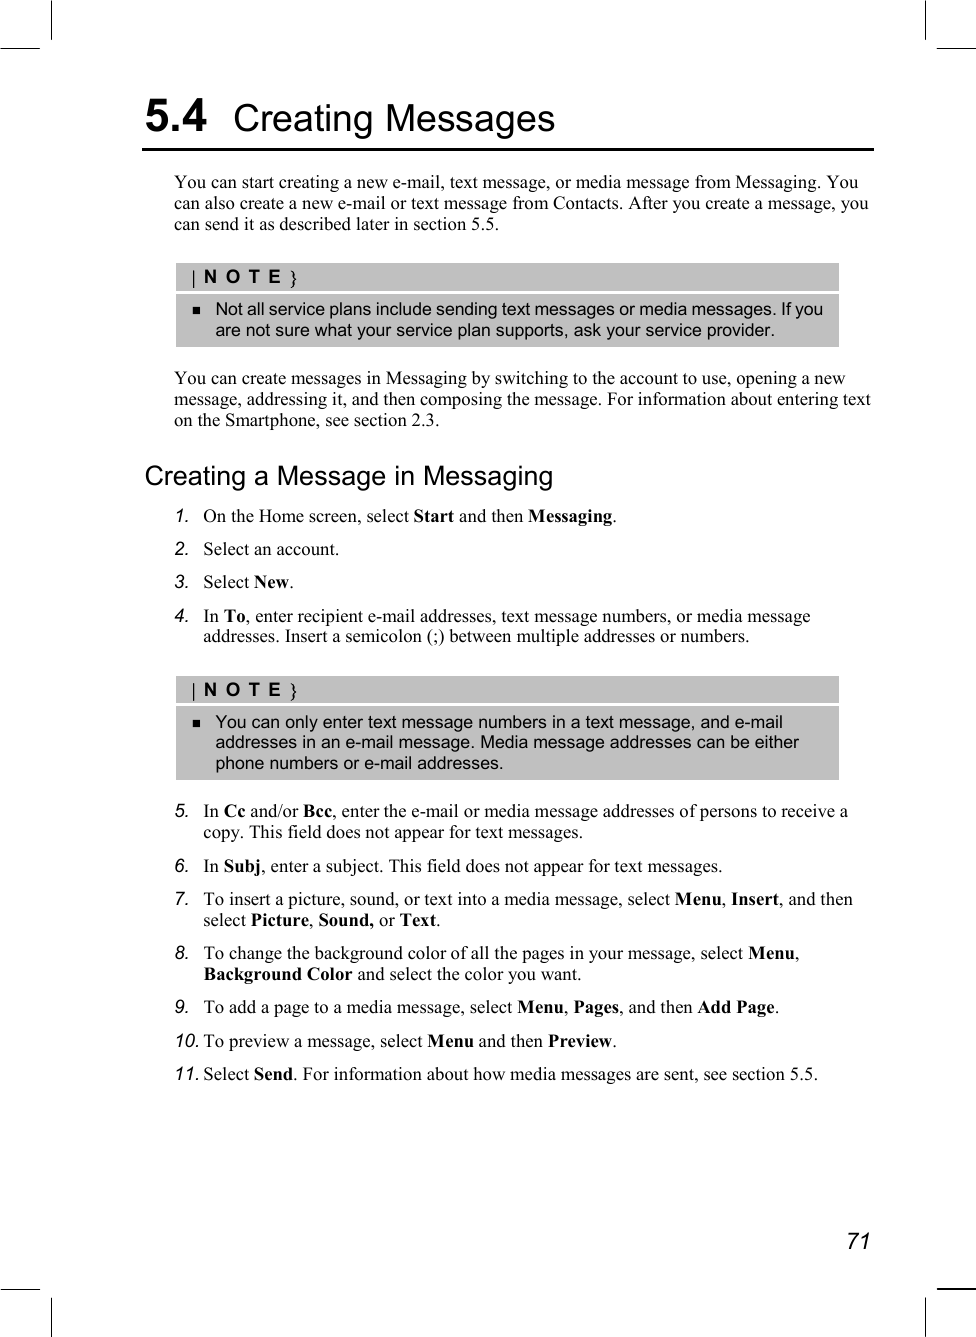   71 5.4  Creating Messages You can start creating a new e-mail, text message, or media message from Messaging. You can also create a new e-mail or text message from Contacts. After you create a message, you can send it as described later in section 5.5.  |NOTE}   Not all service plans include sending text messages or media messages. If you are not sure what your service plan supports, ask your service provider.  You can create messages in Messaging by switching to the account to use, opening a new message, addressing it, and then composing the message. For information about entering text on the Smartphone, see section 2.3. Creating a Message in Messaging 1.  On the Home screen, select Start and then Messaging. 2.  Select an account. 3.  Select New. 4.  In To, enter recipient e-mail addresses, text message numbers, or media message addresses. Insert a semicolon (;) between multiple addresses or numbers.  |NOTE}   You can only enter text message numbers in a text message, and e-mail addresses in an e-mail message. Media message addresses can be either phone numbers or e-mail addresses.  5.  In Cc and/or Bcc, enter the e-mail or media message addresses of persons to receive a copy. This field does not appear for text messages. 6.  In Subj, enter a subject. This field does not appear for text messages. 7.  To insert a picture, sound, or text into a media message, select Menu, Insert, and then select Picture, Sound, or Text. 8.  To change the background color of all the pages in your message, select Menu, Background Color and select the color you want. 9.  To add a page to a media message, select Menu, Pages, and then Add Page. 10. To preview a message, select Menu and then Preview. 11. Select Send. For information about how media messages are sent, see section 5.5. 